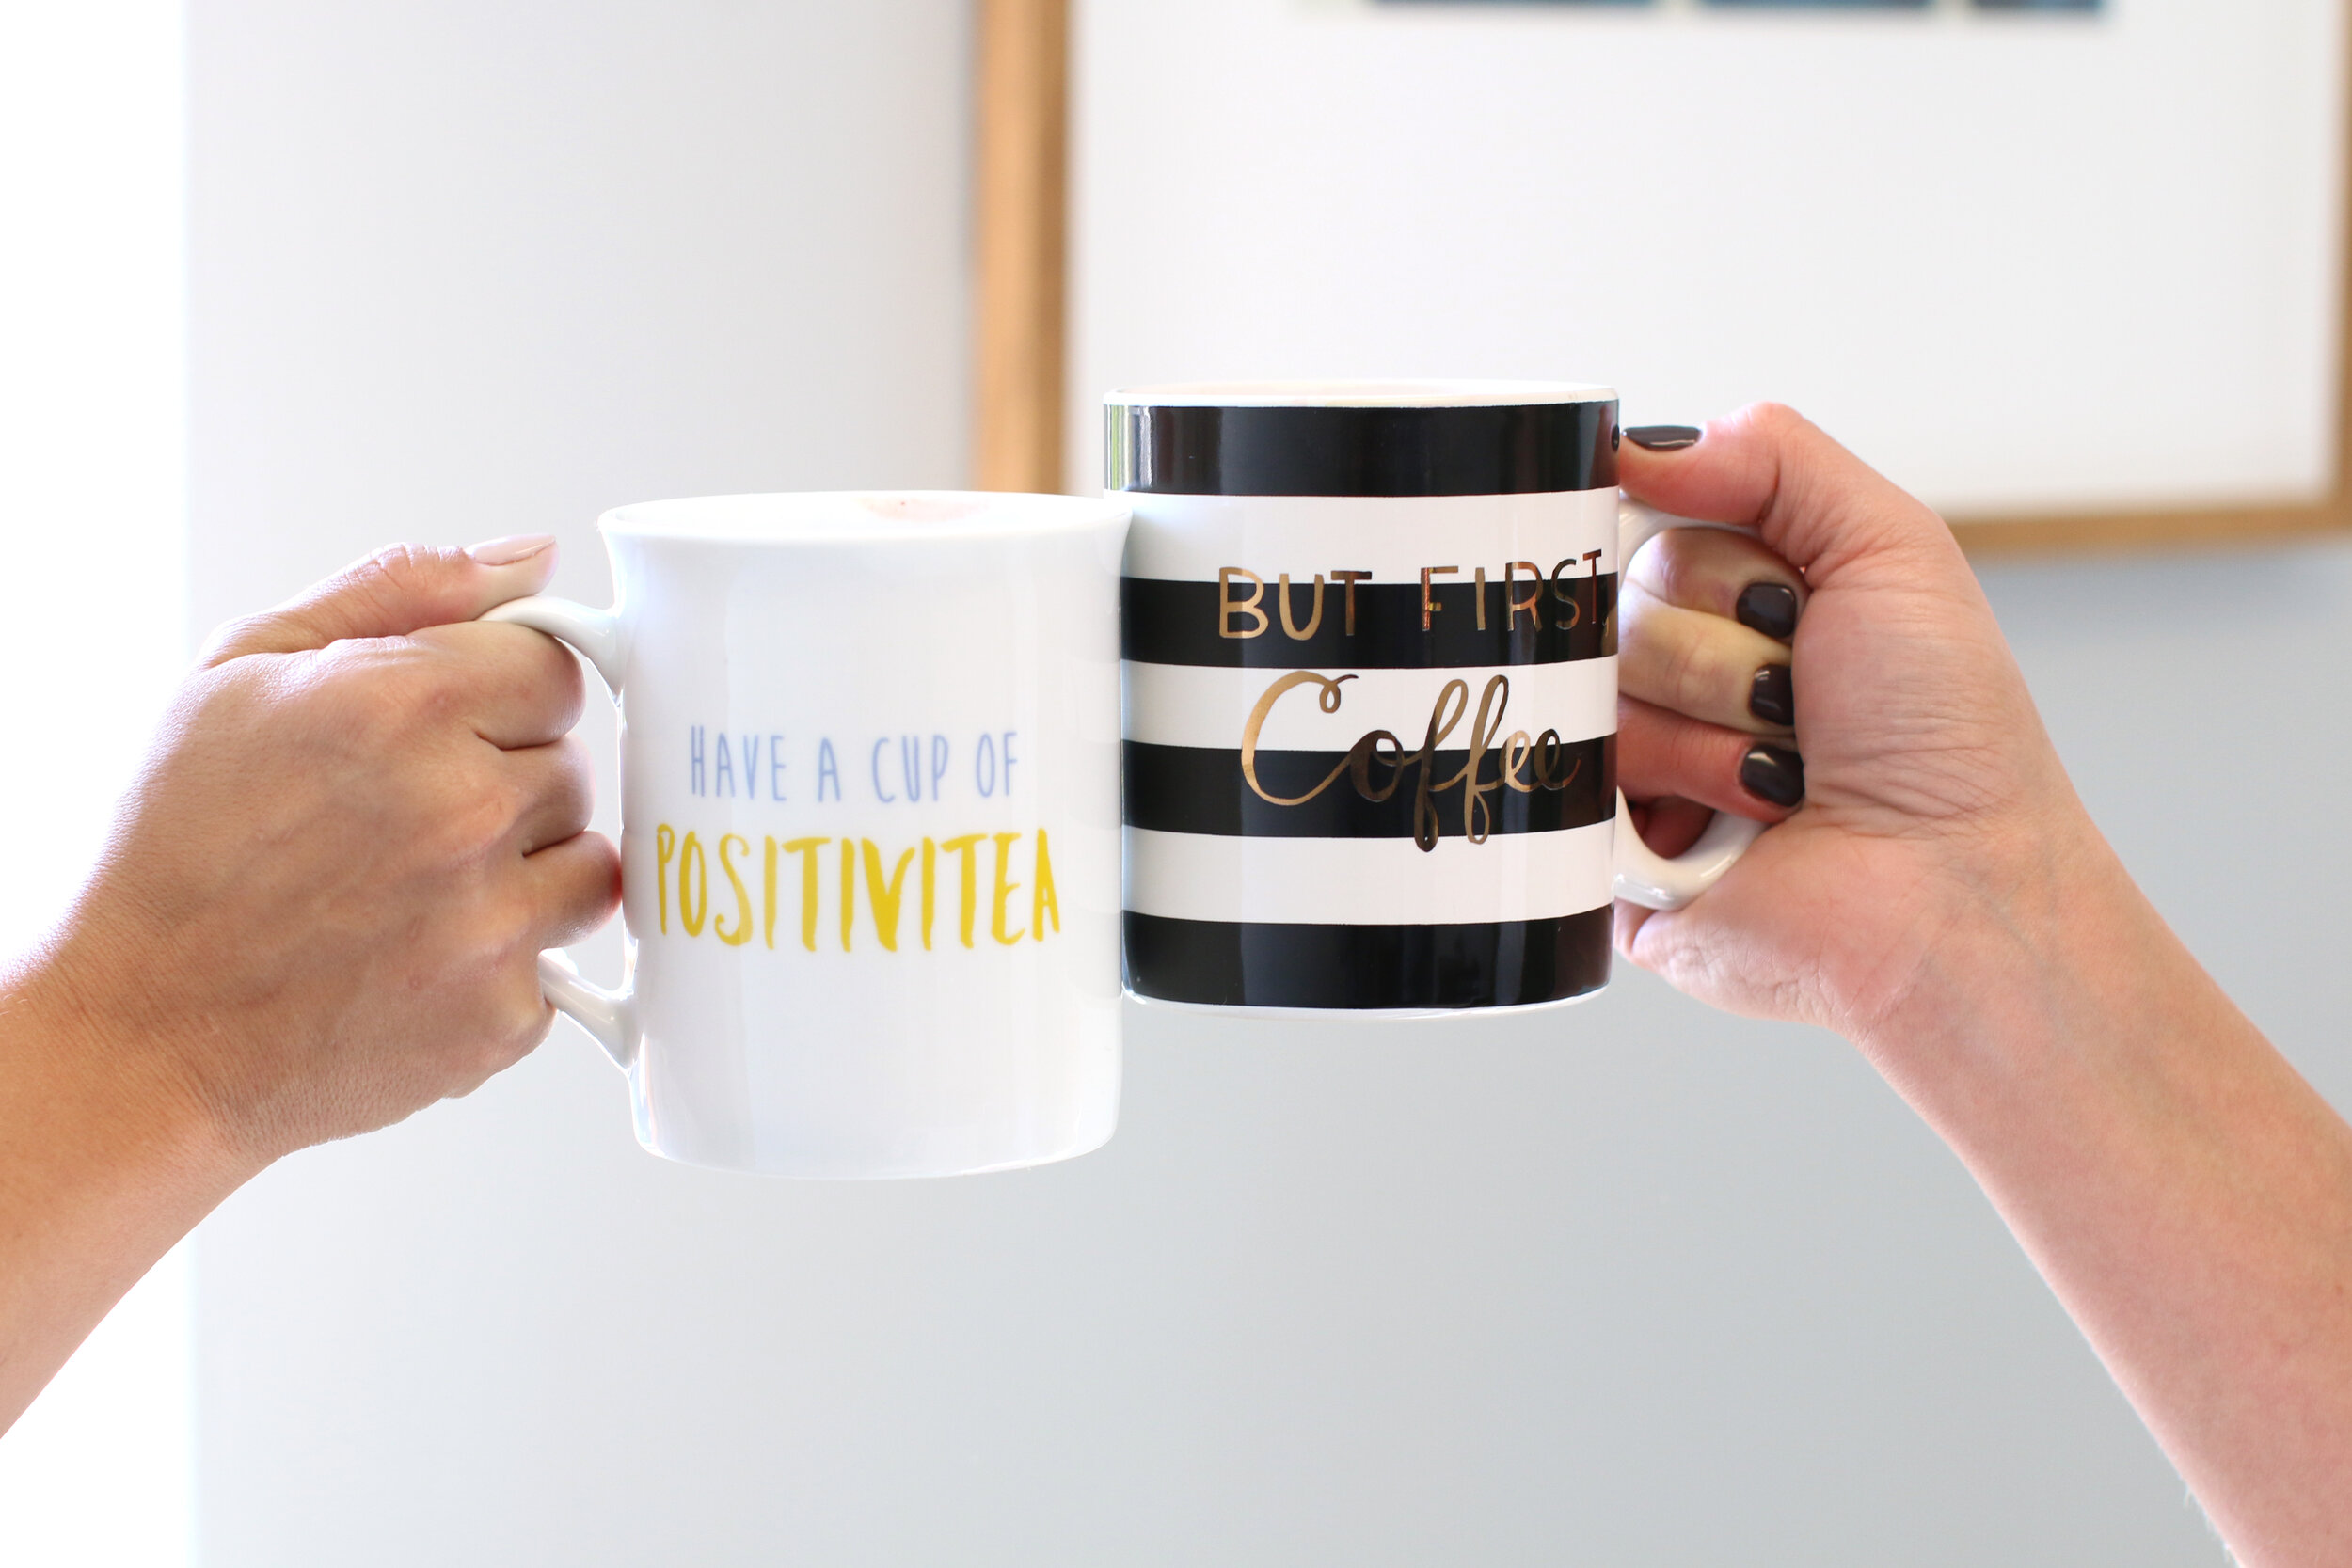  The start to a great day is often a cup of something delicious (+ caffeinated) to give you a boost of energy and motivate you to get down to business. We provide endless amounts of coffee and tea plus a motivational, inspirational, or just funny mug